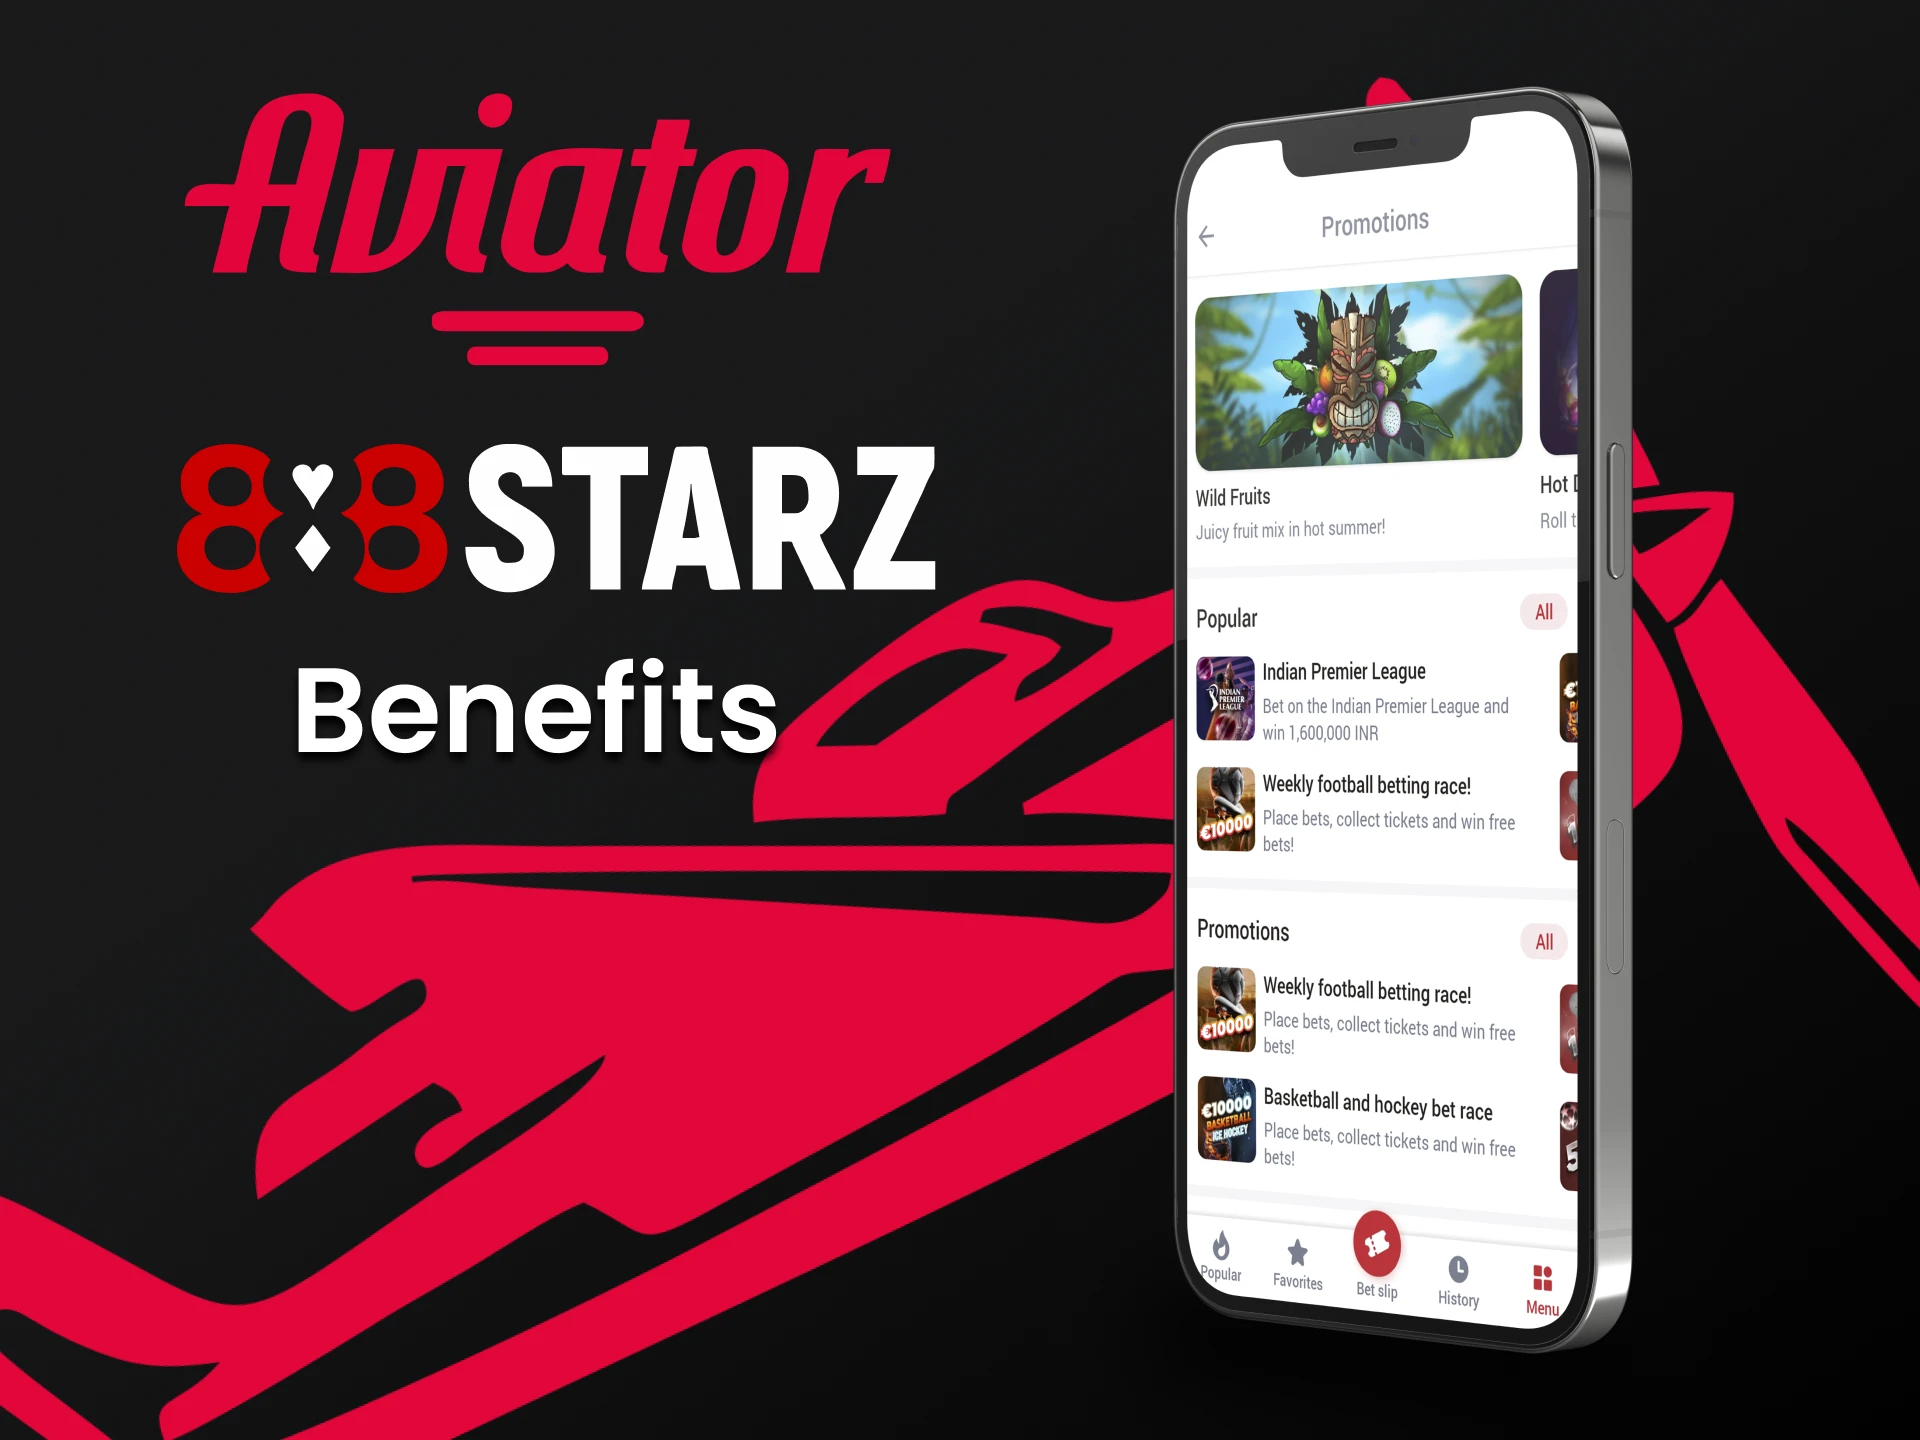 Find out all the benefits of the 888starz app.